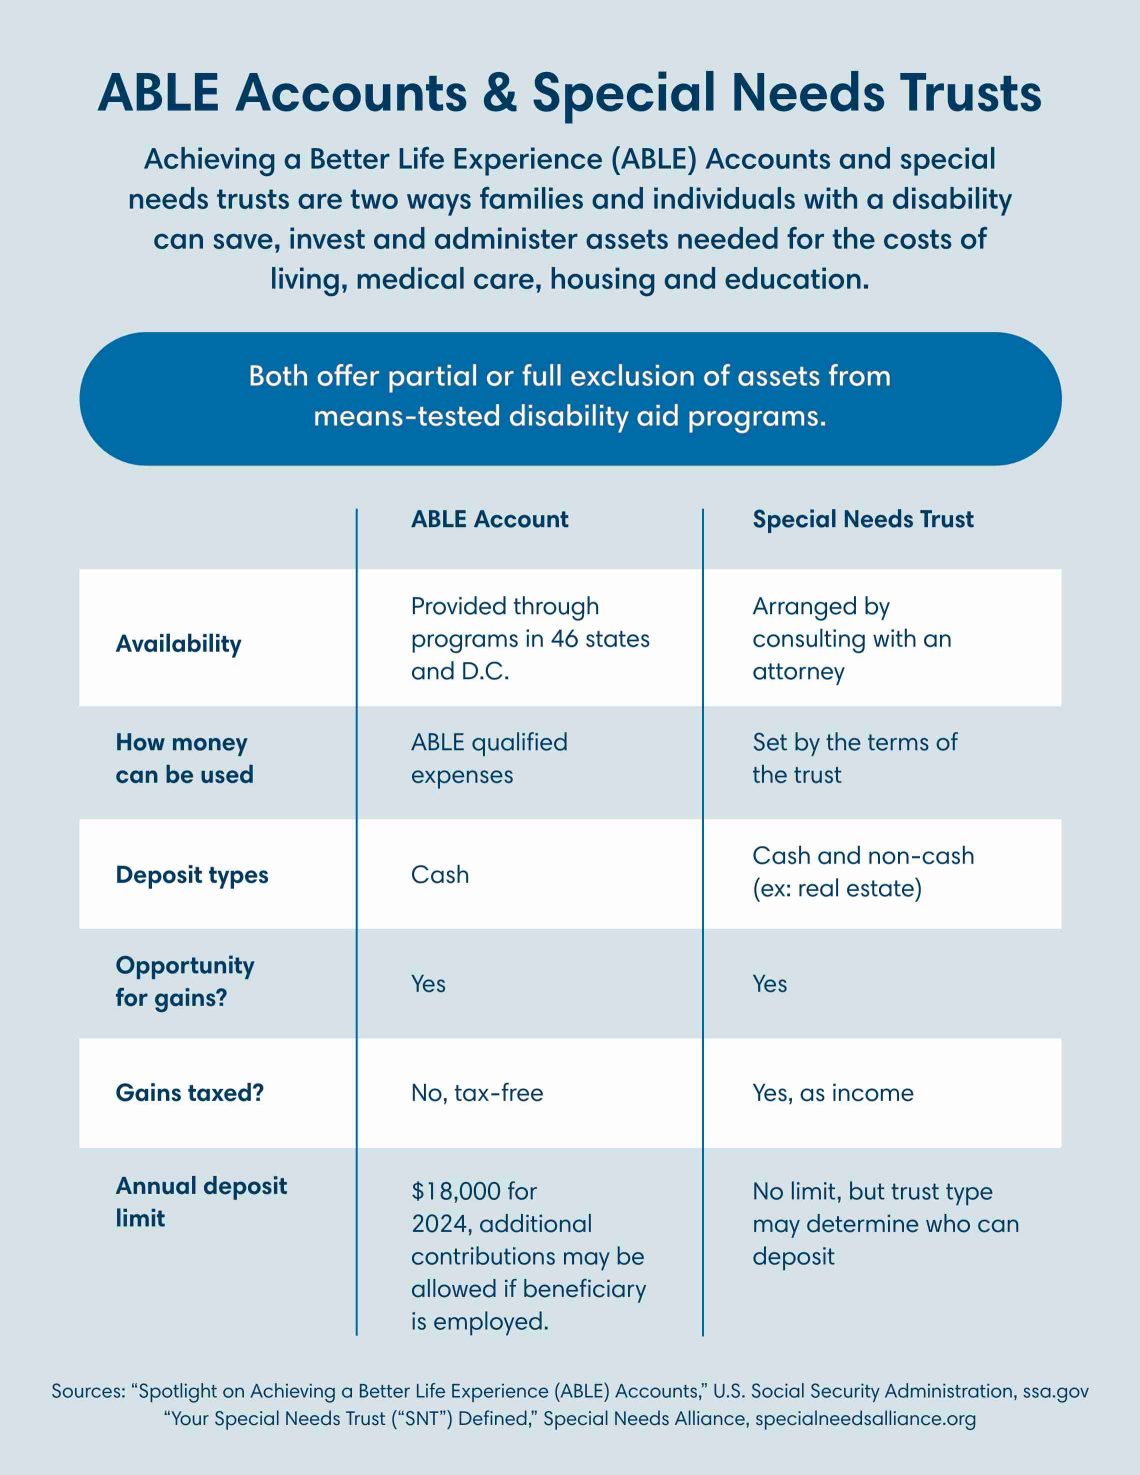 Infographic depicting the features of both ABLE accounts and special needs trusts